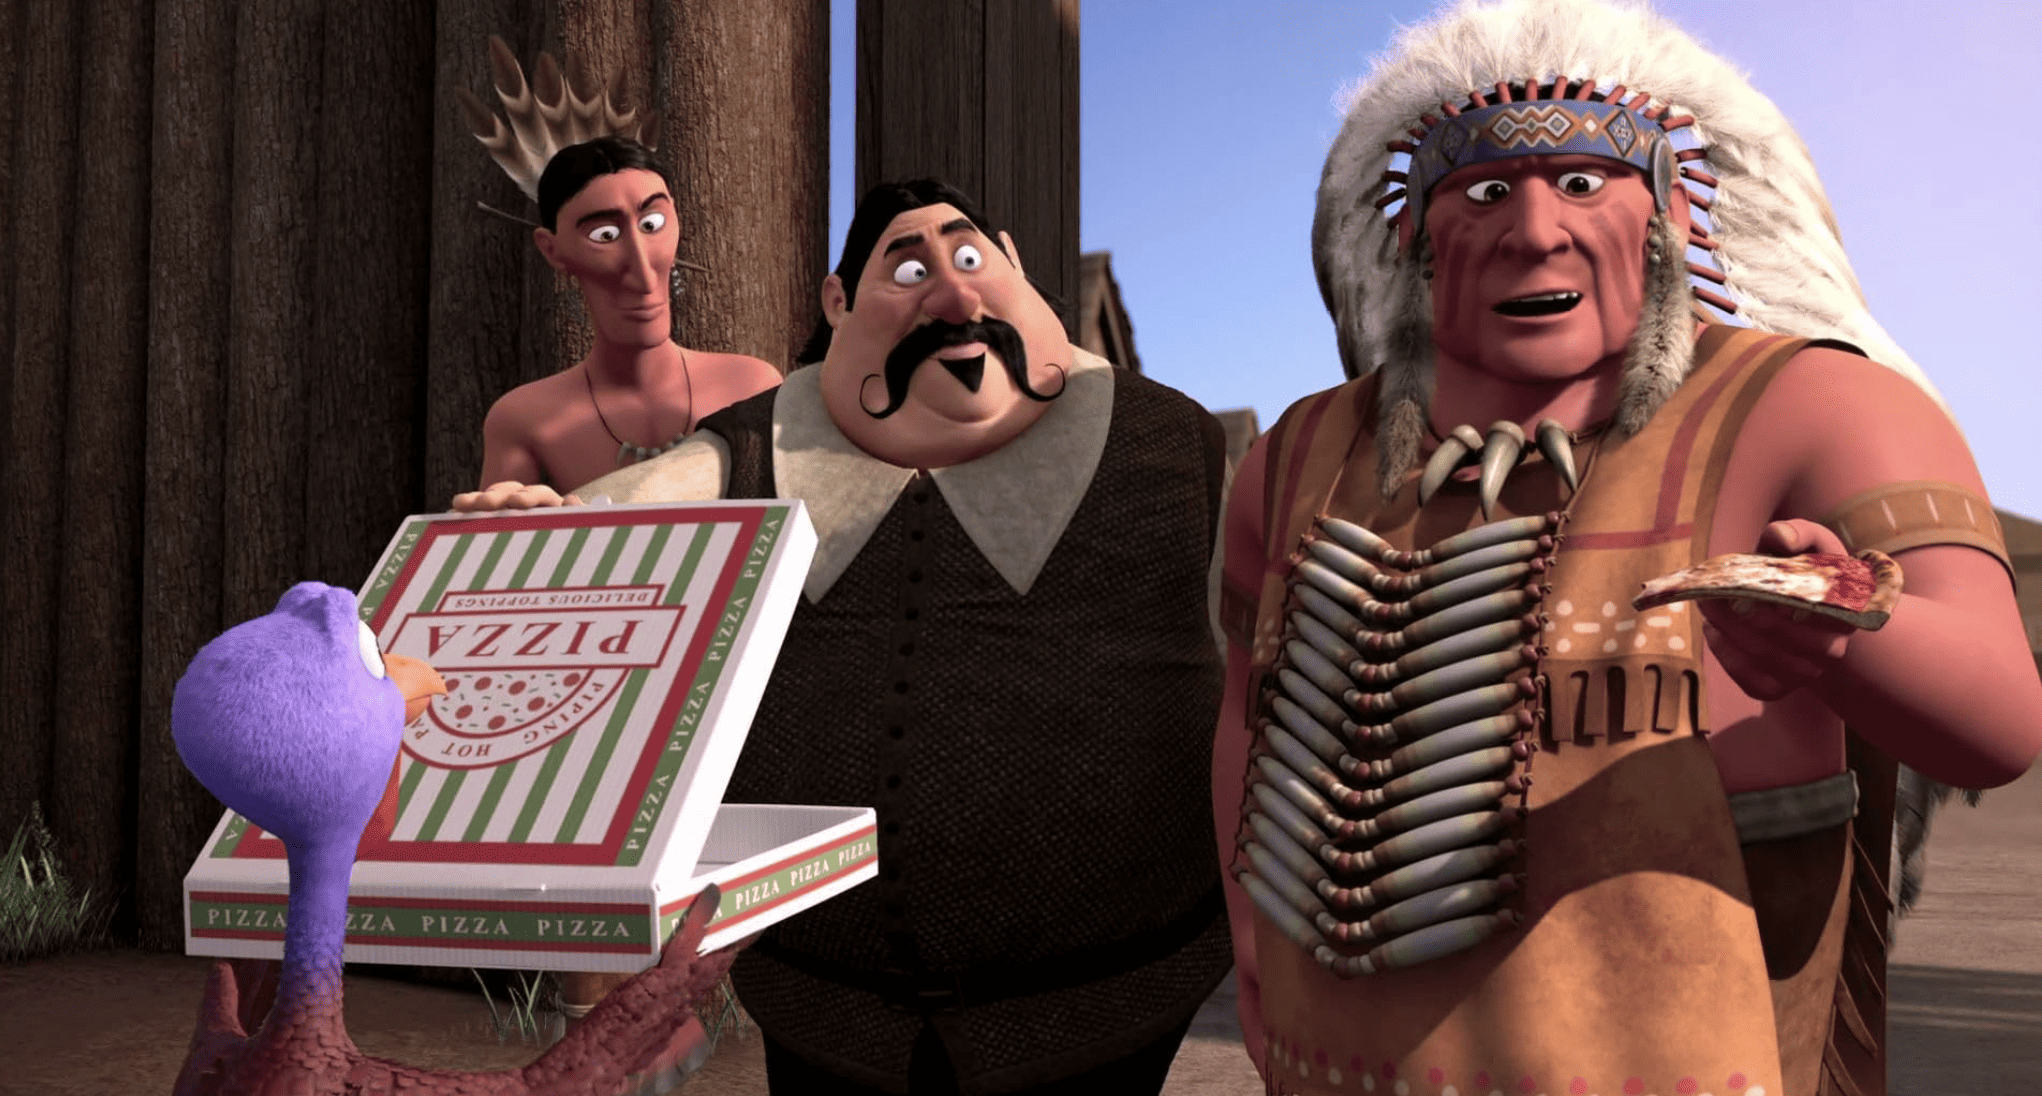 A turkey presents pizza to a pilgrim and two Native Americans for consideration in this image from Reel FX Animation Studios.